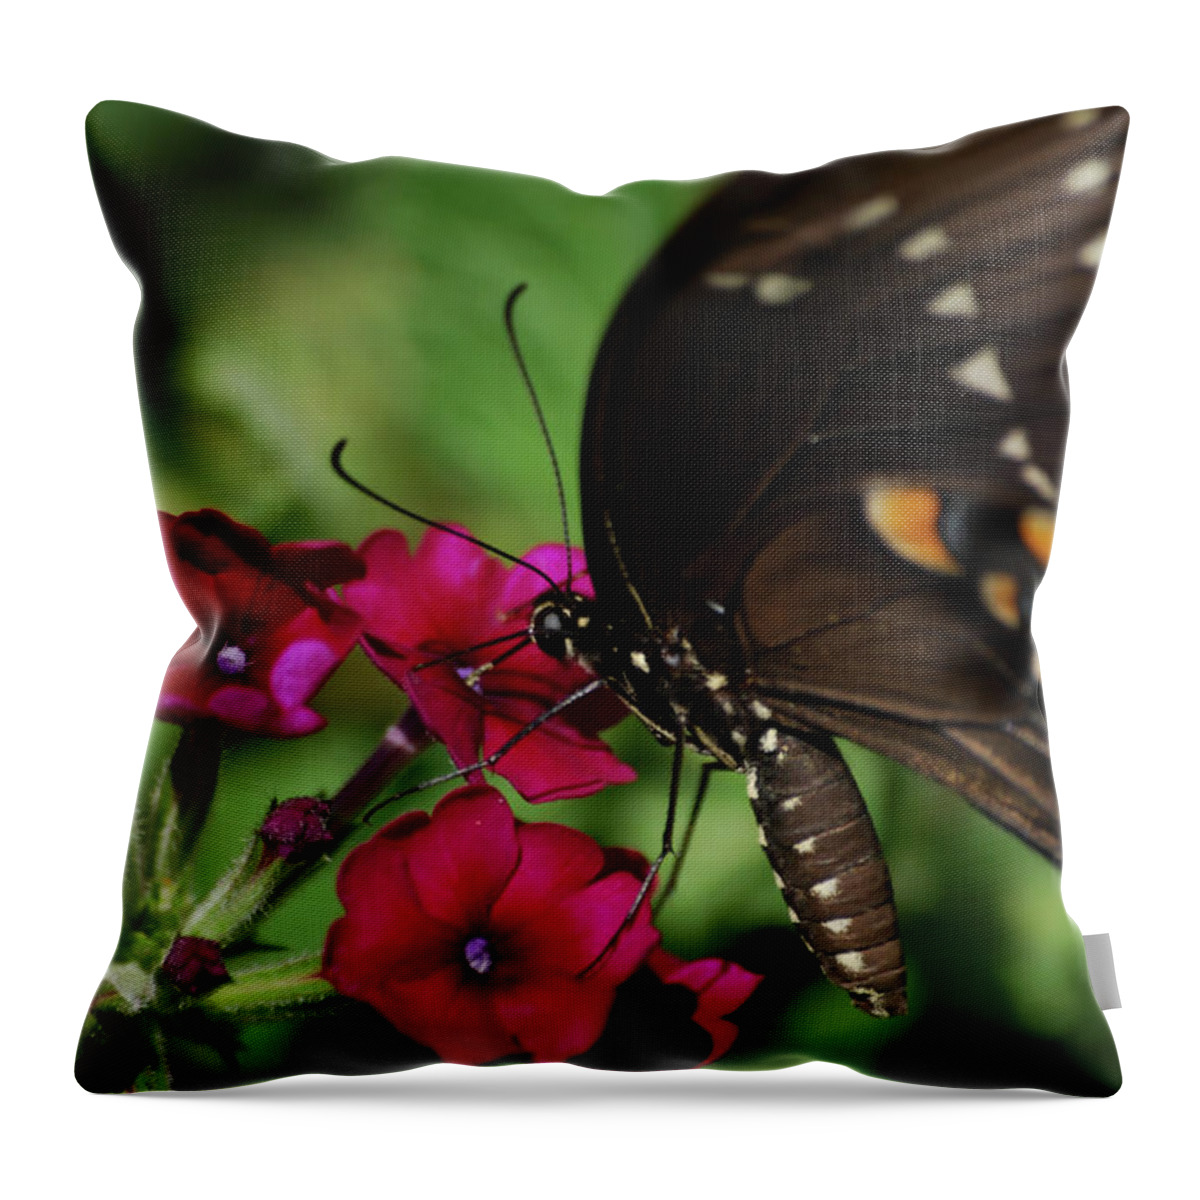 Butterfly Throw Pillow featuring the photograph Summer Treat by Lori Tambakis